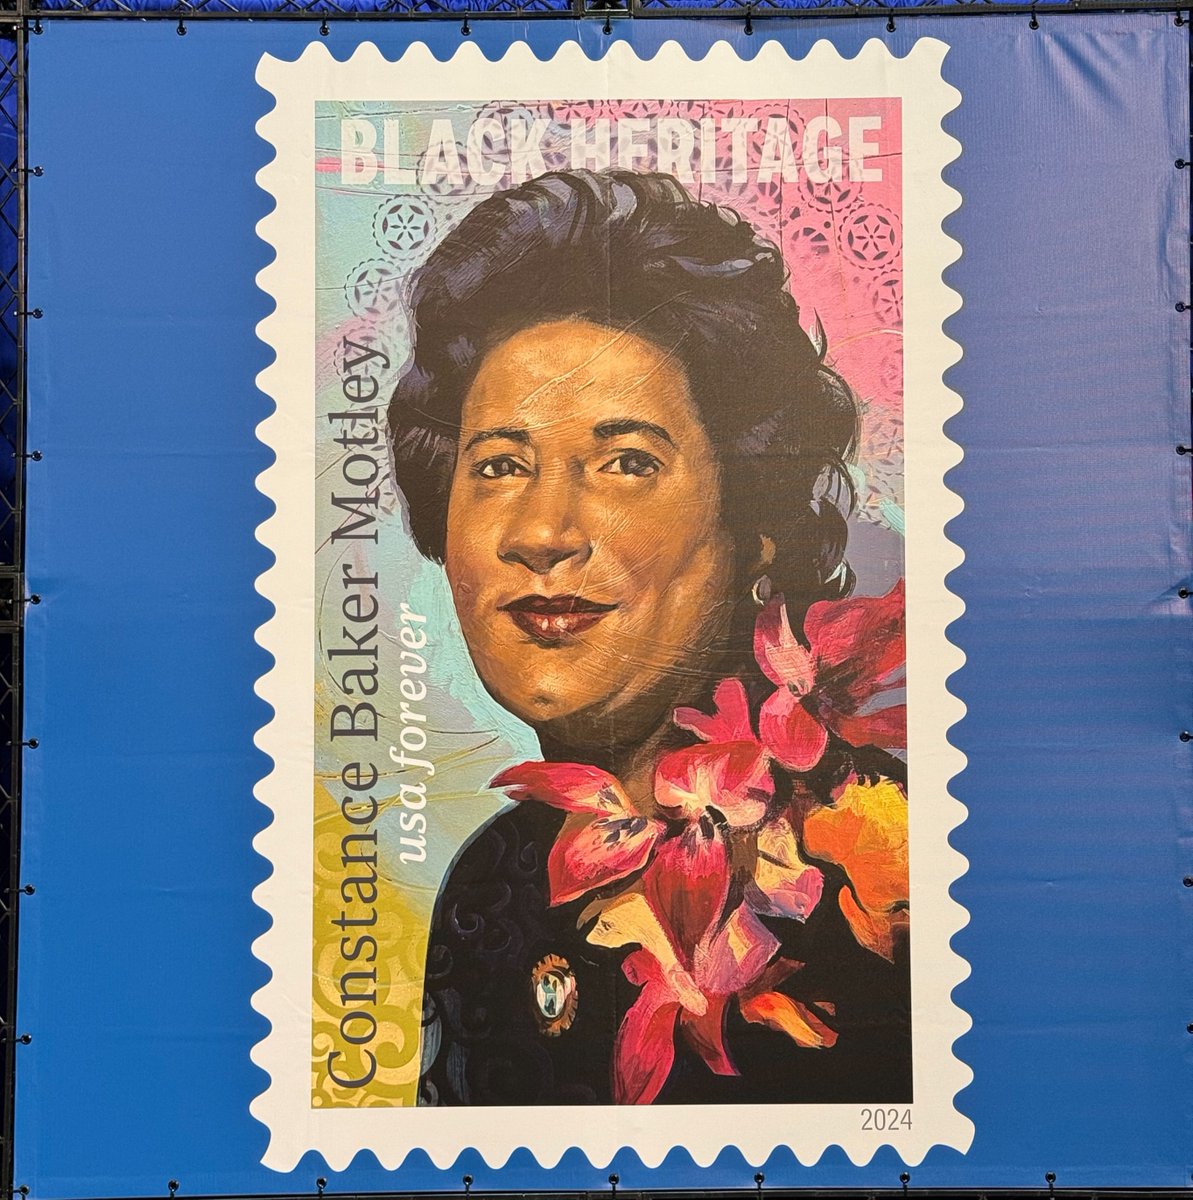 'Judge Motley's name deserves to be known among these luminaries because although others got the credit, her writings and arguments carried the day.' – @USPS Board of Governors Anton G. Hajjar

We were deeply inspired by the words at the #ConstanceBakerMotley stamp ceremony.